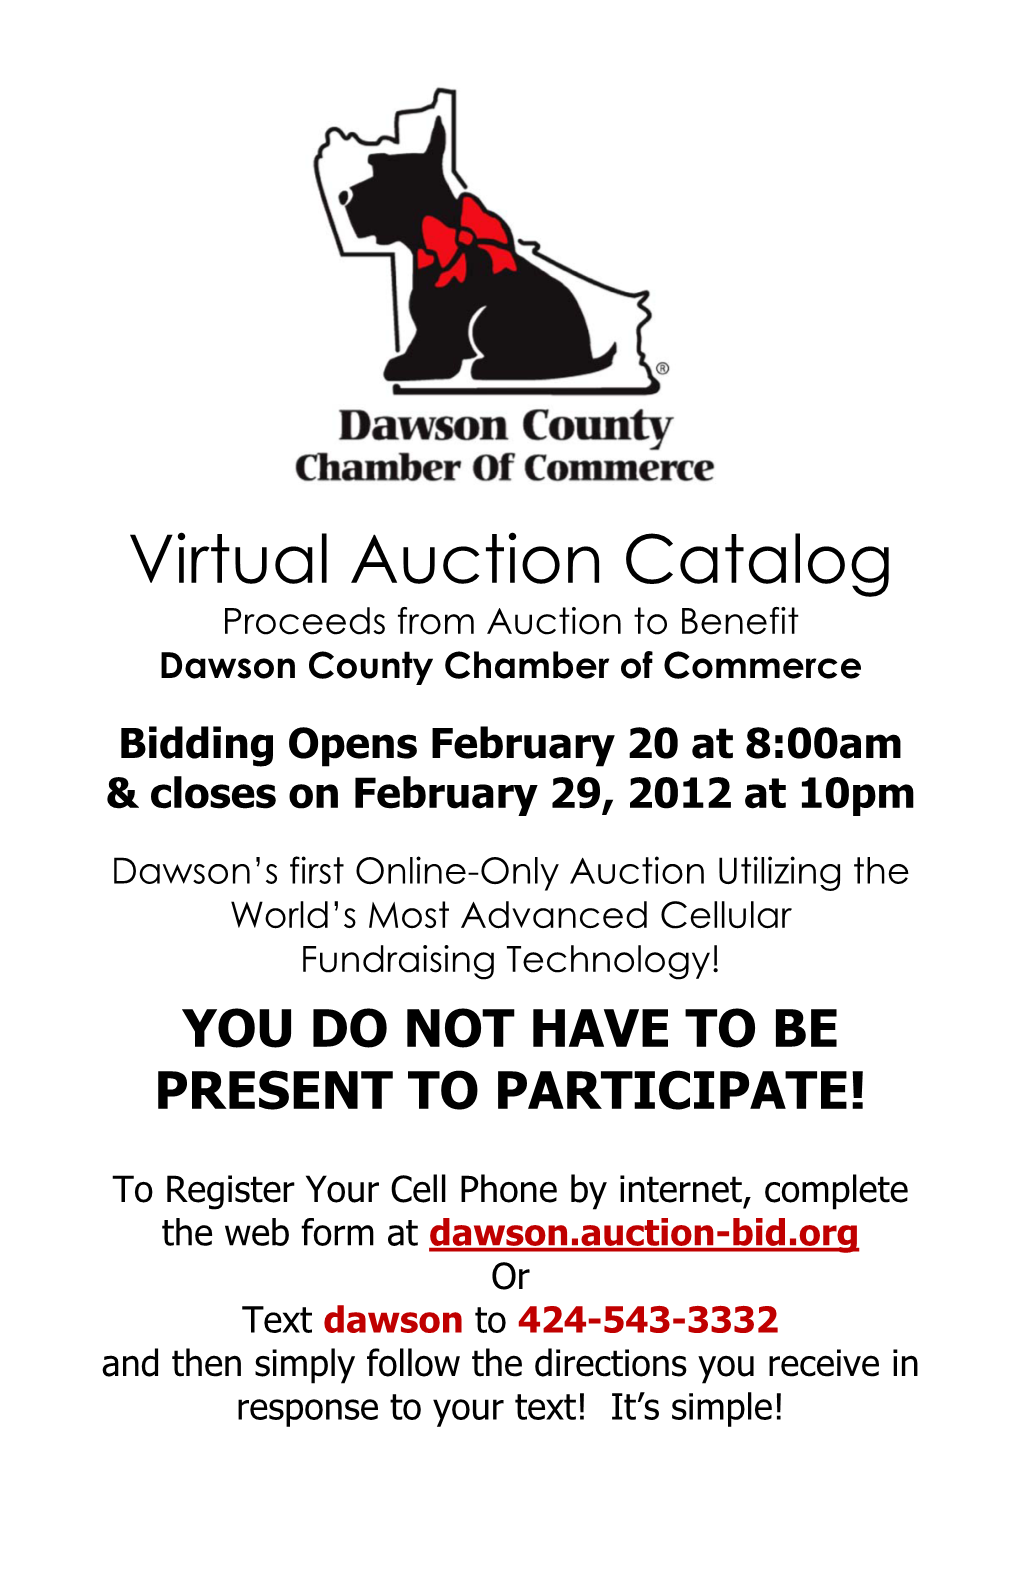 Virtual Auction Catalog Proceeds from Auction to Benefit Dawson County Chamber of Commerce Bidding Opens February 20 at 8:00Am & Closes on February 29, 2012 at 10Pm